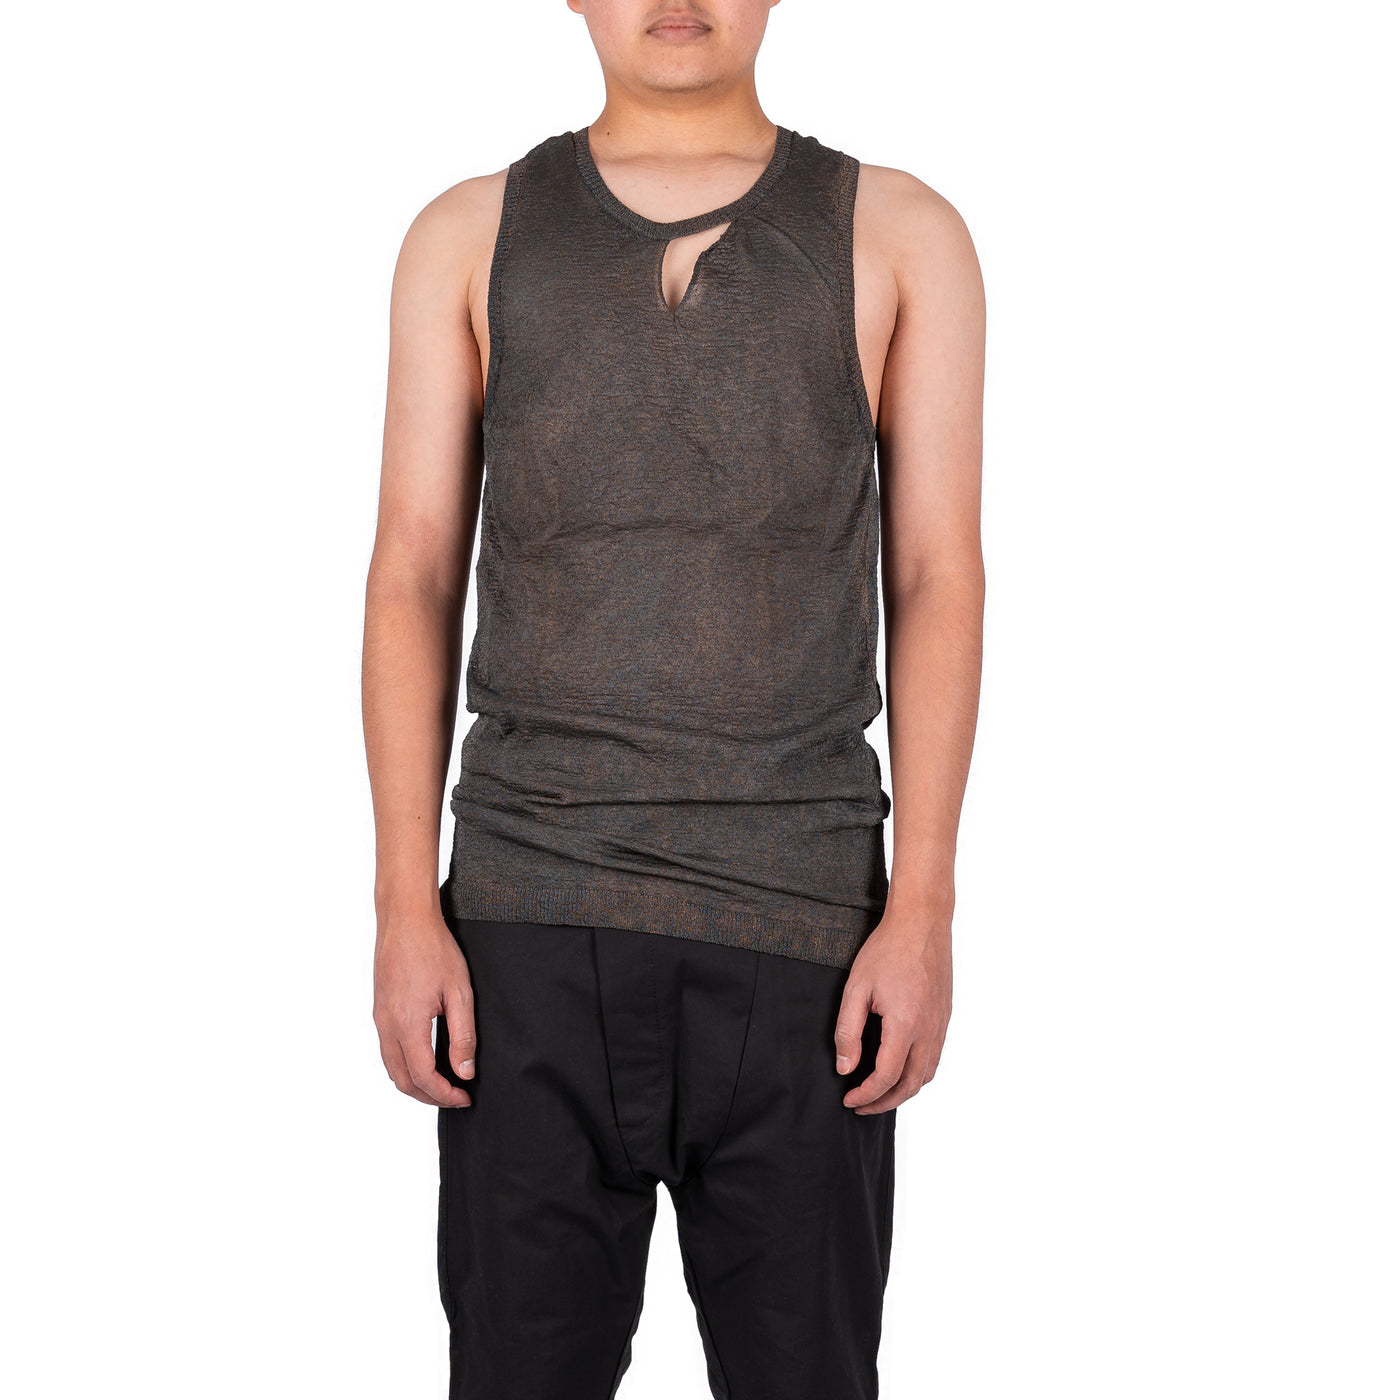 KNITTED .999 SILVER VEST